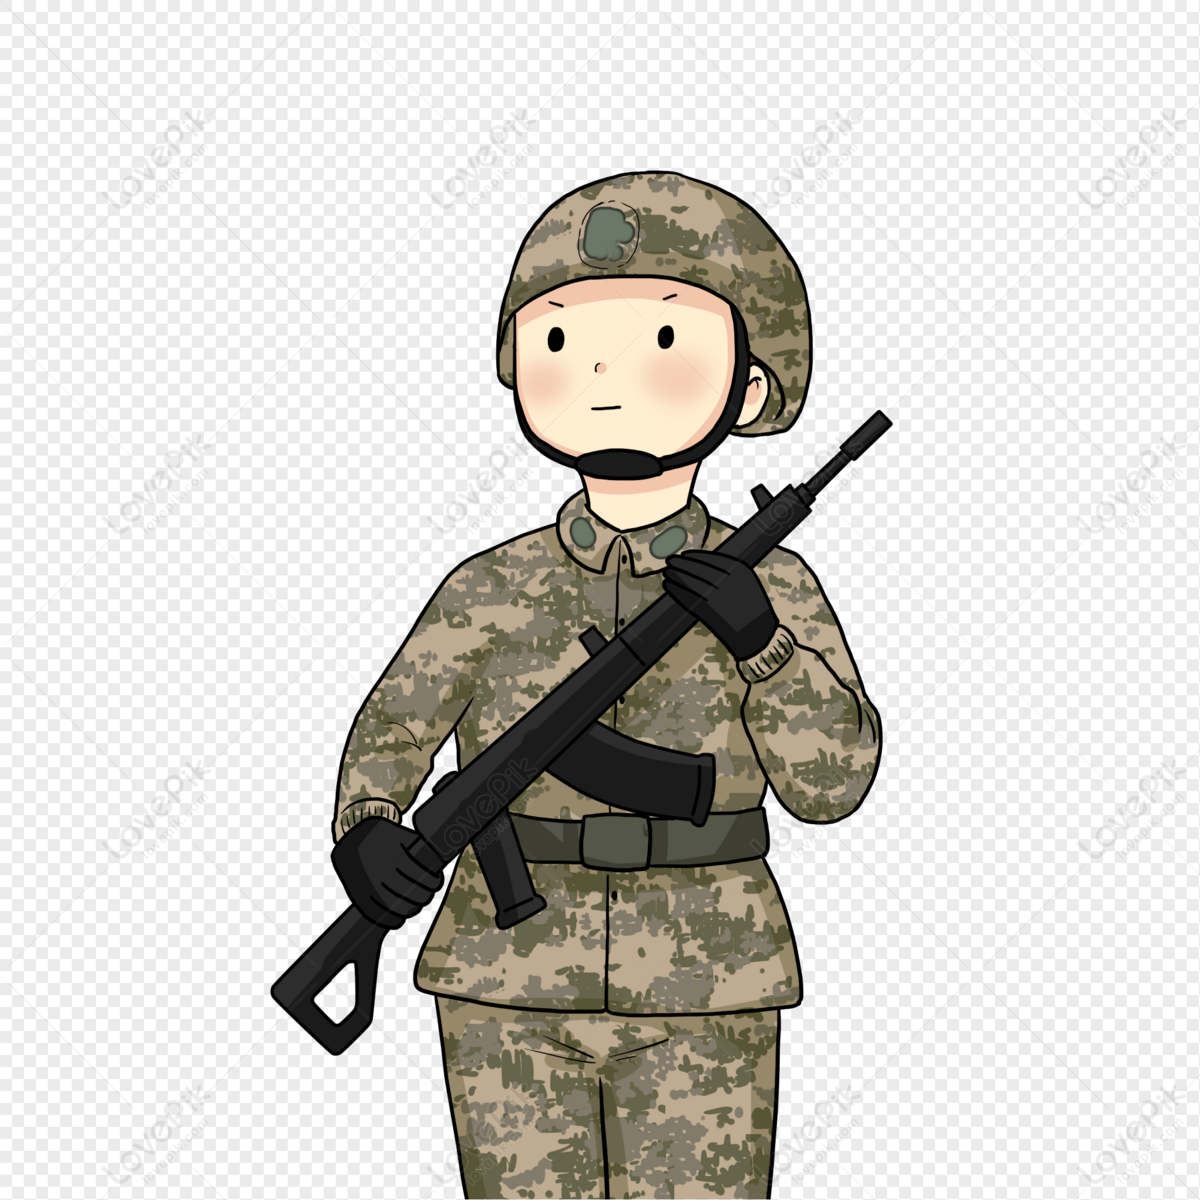 Soldier PNG Transparent Background And Clipart Image For Free Download -  Lovepik | 401624170